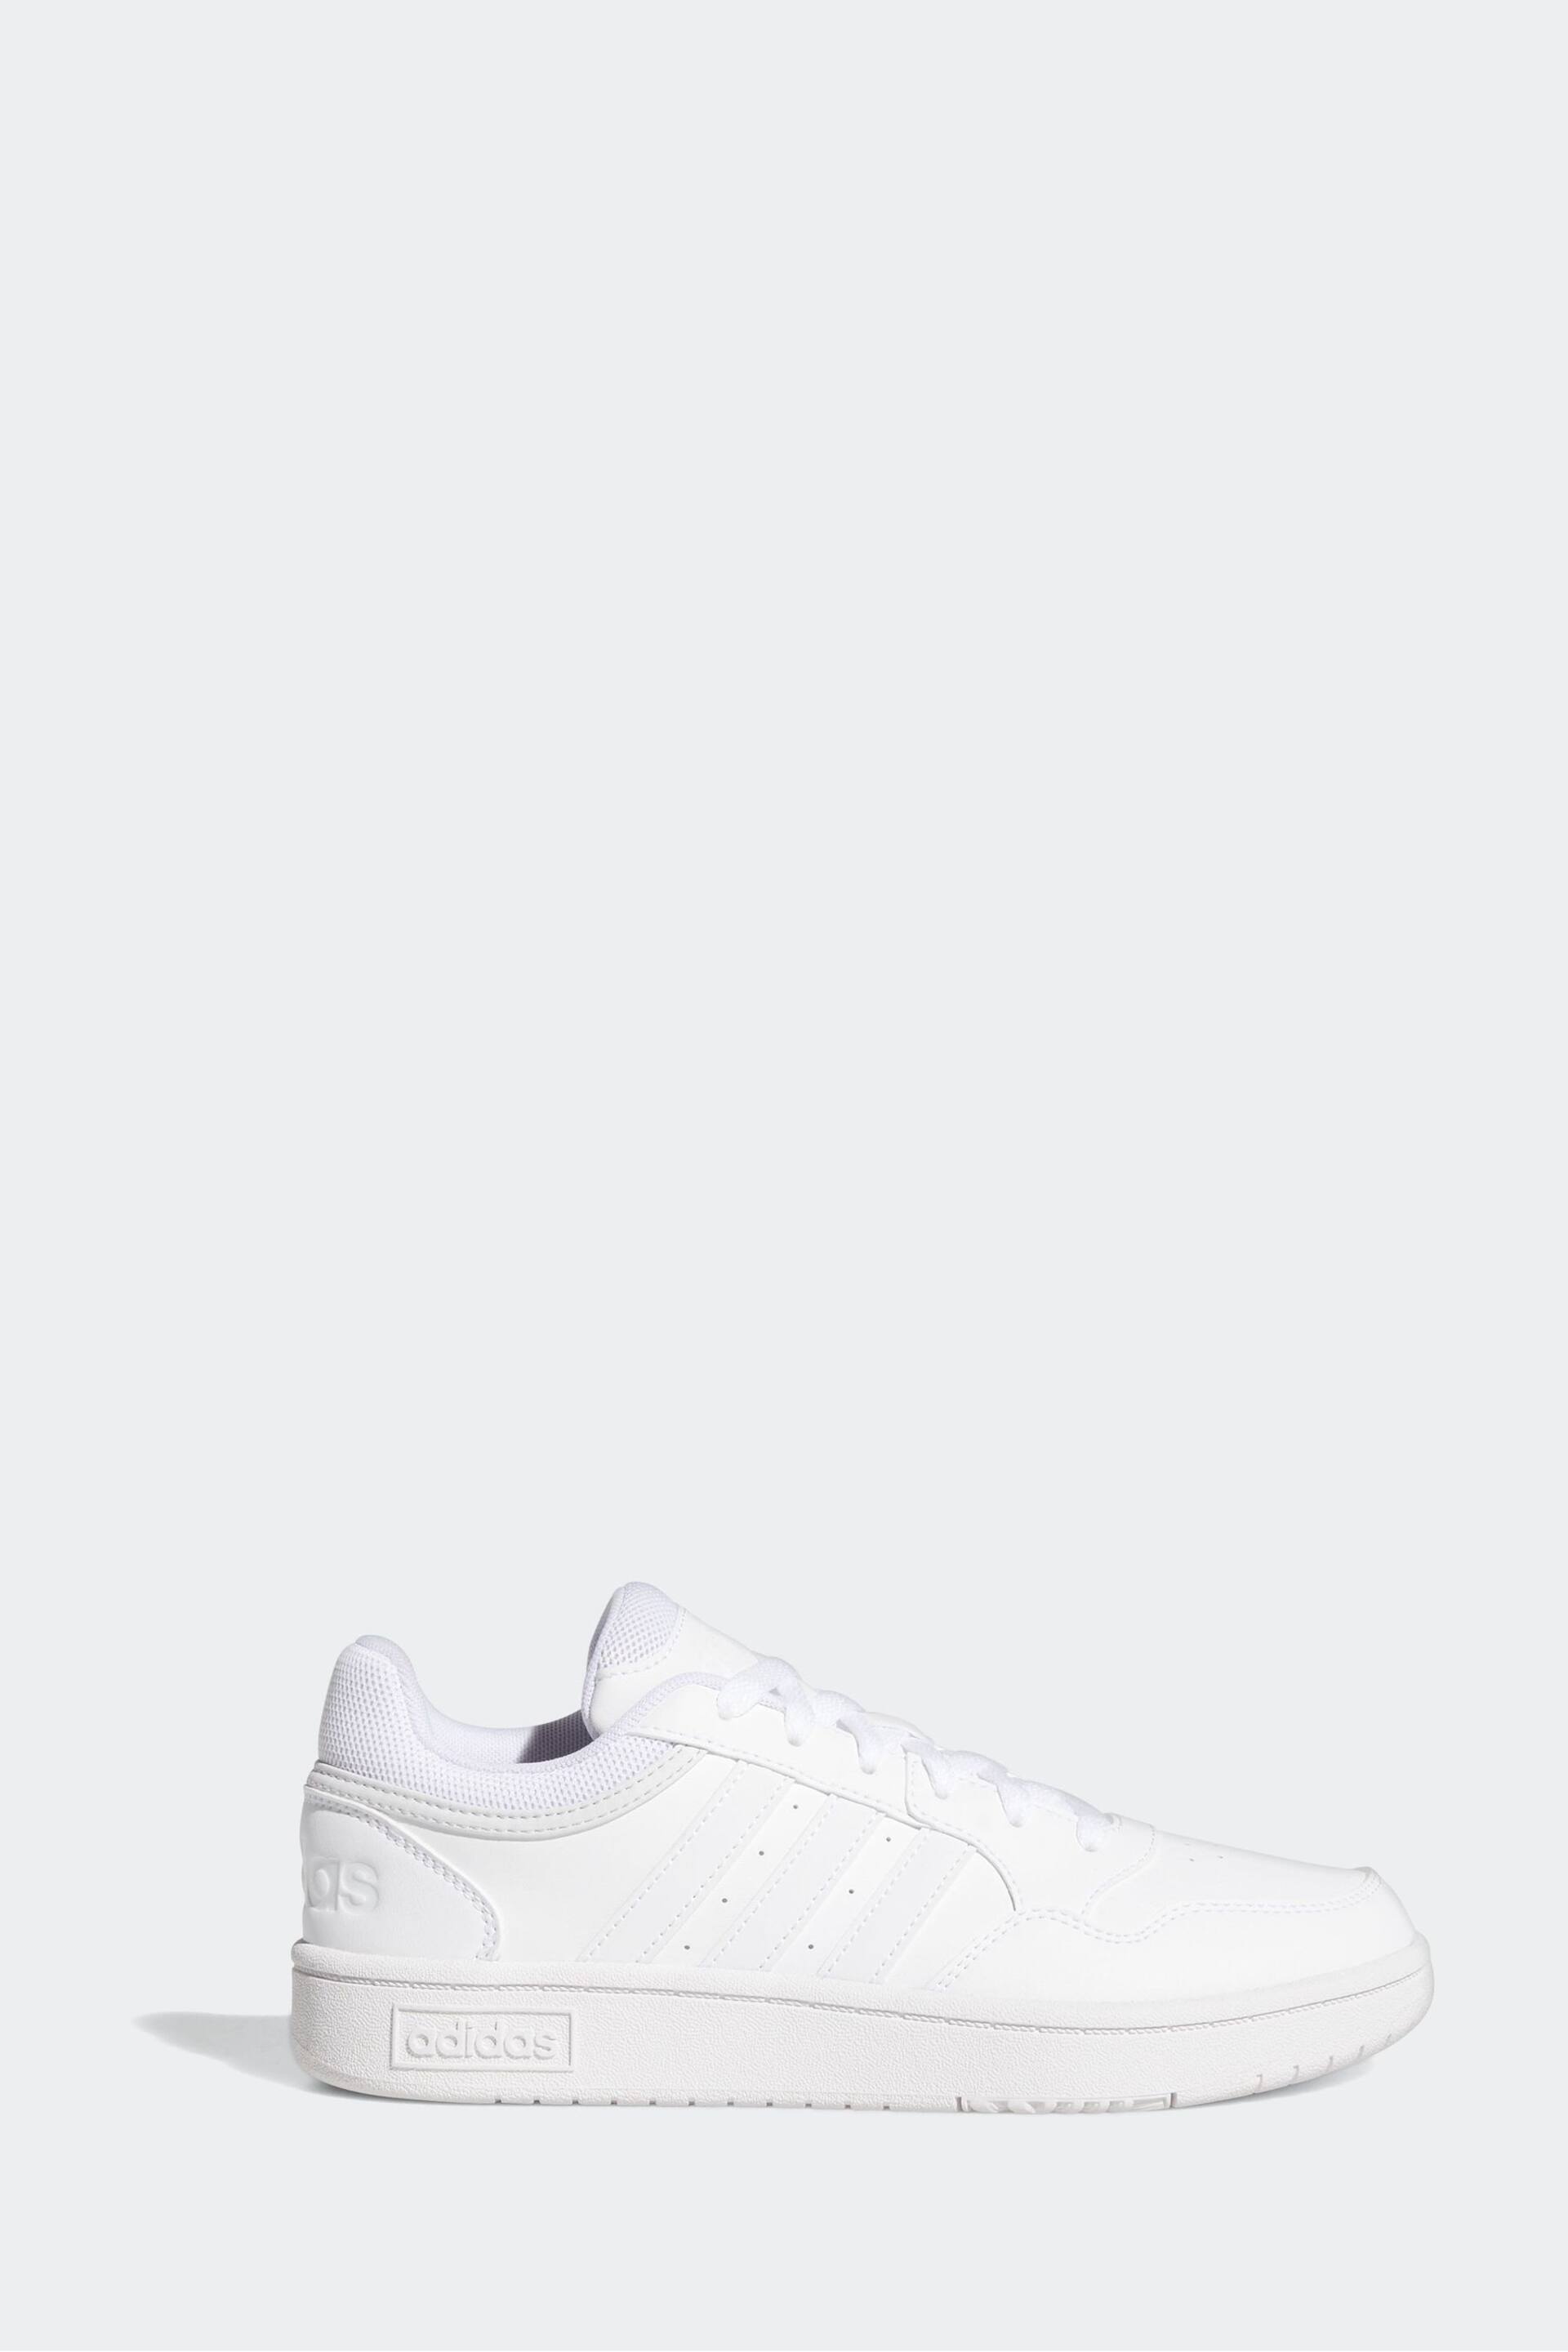 adidas Originals White Hoops 3.0 Low Classic Trainers - Image 1 of 11